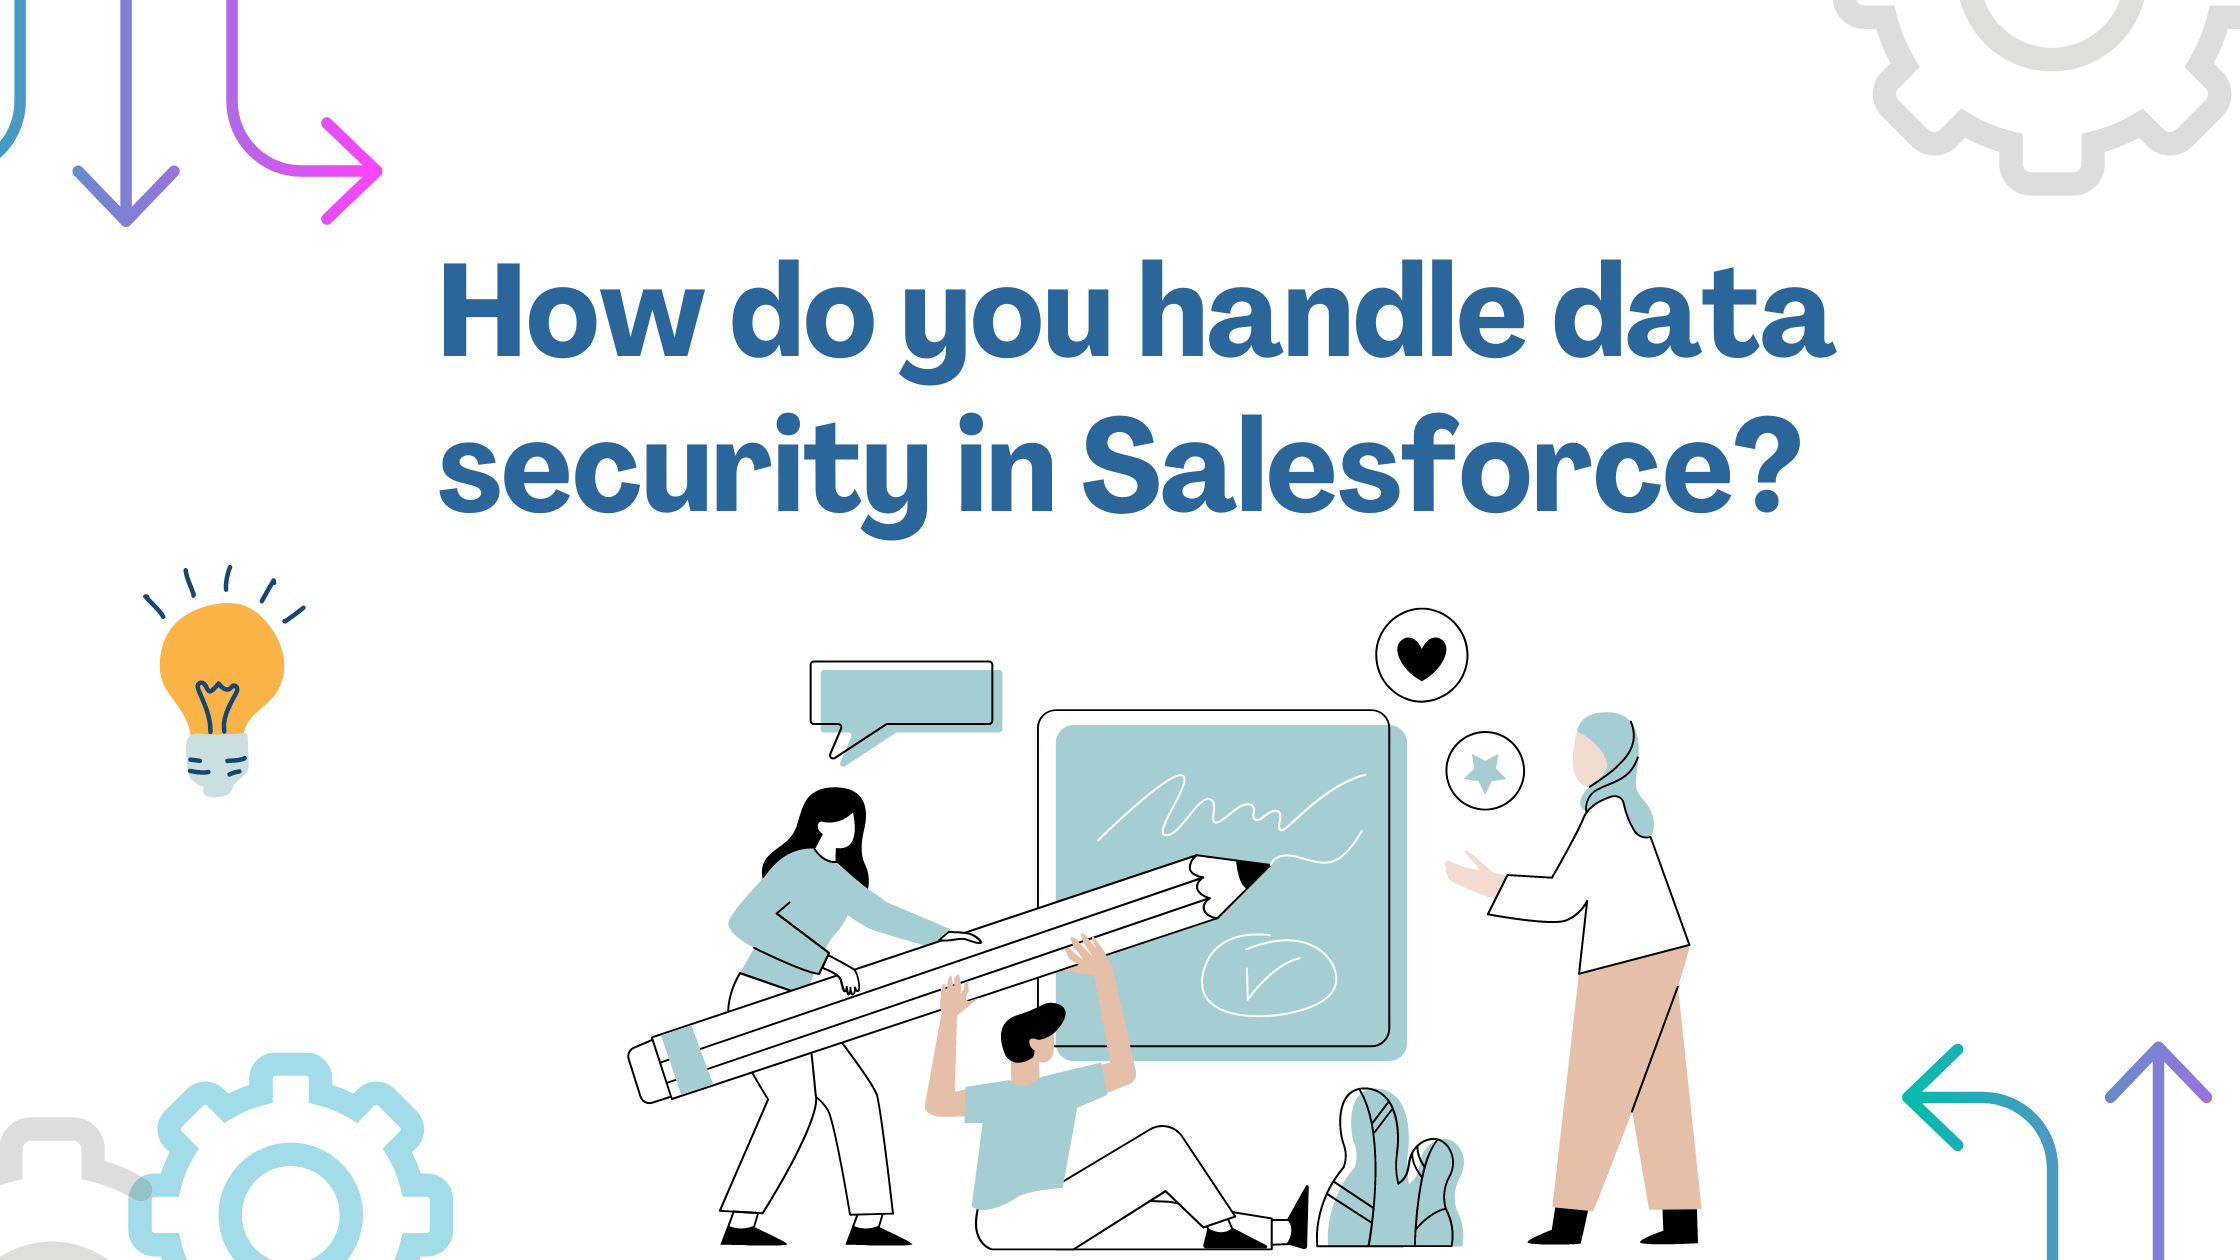 How do you handle data security in Salesforce